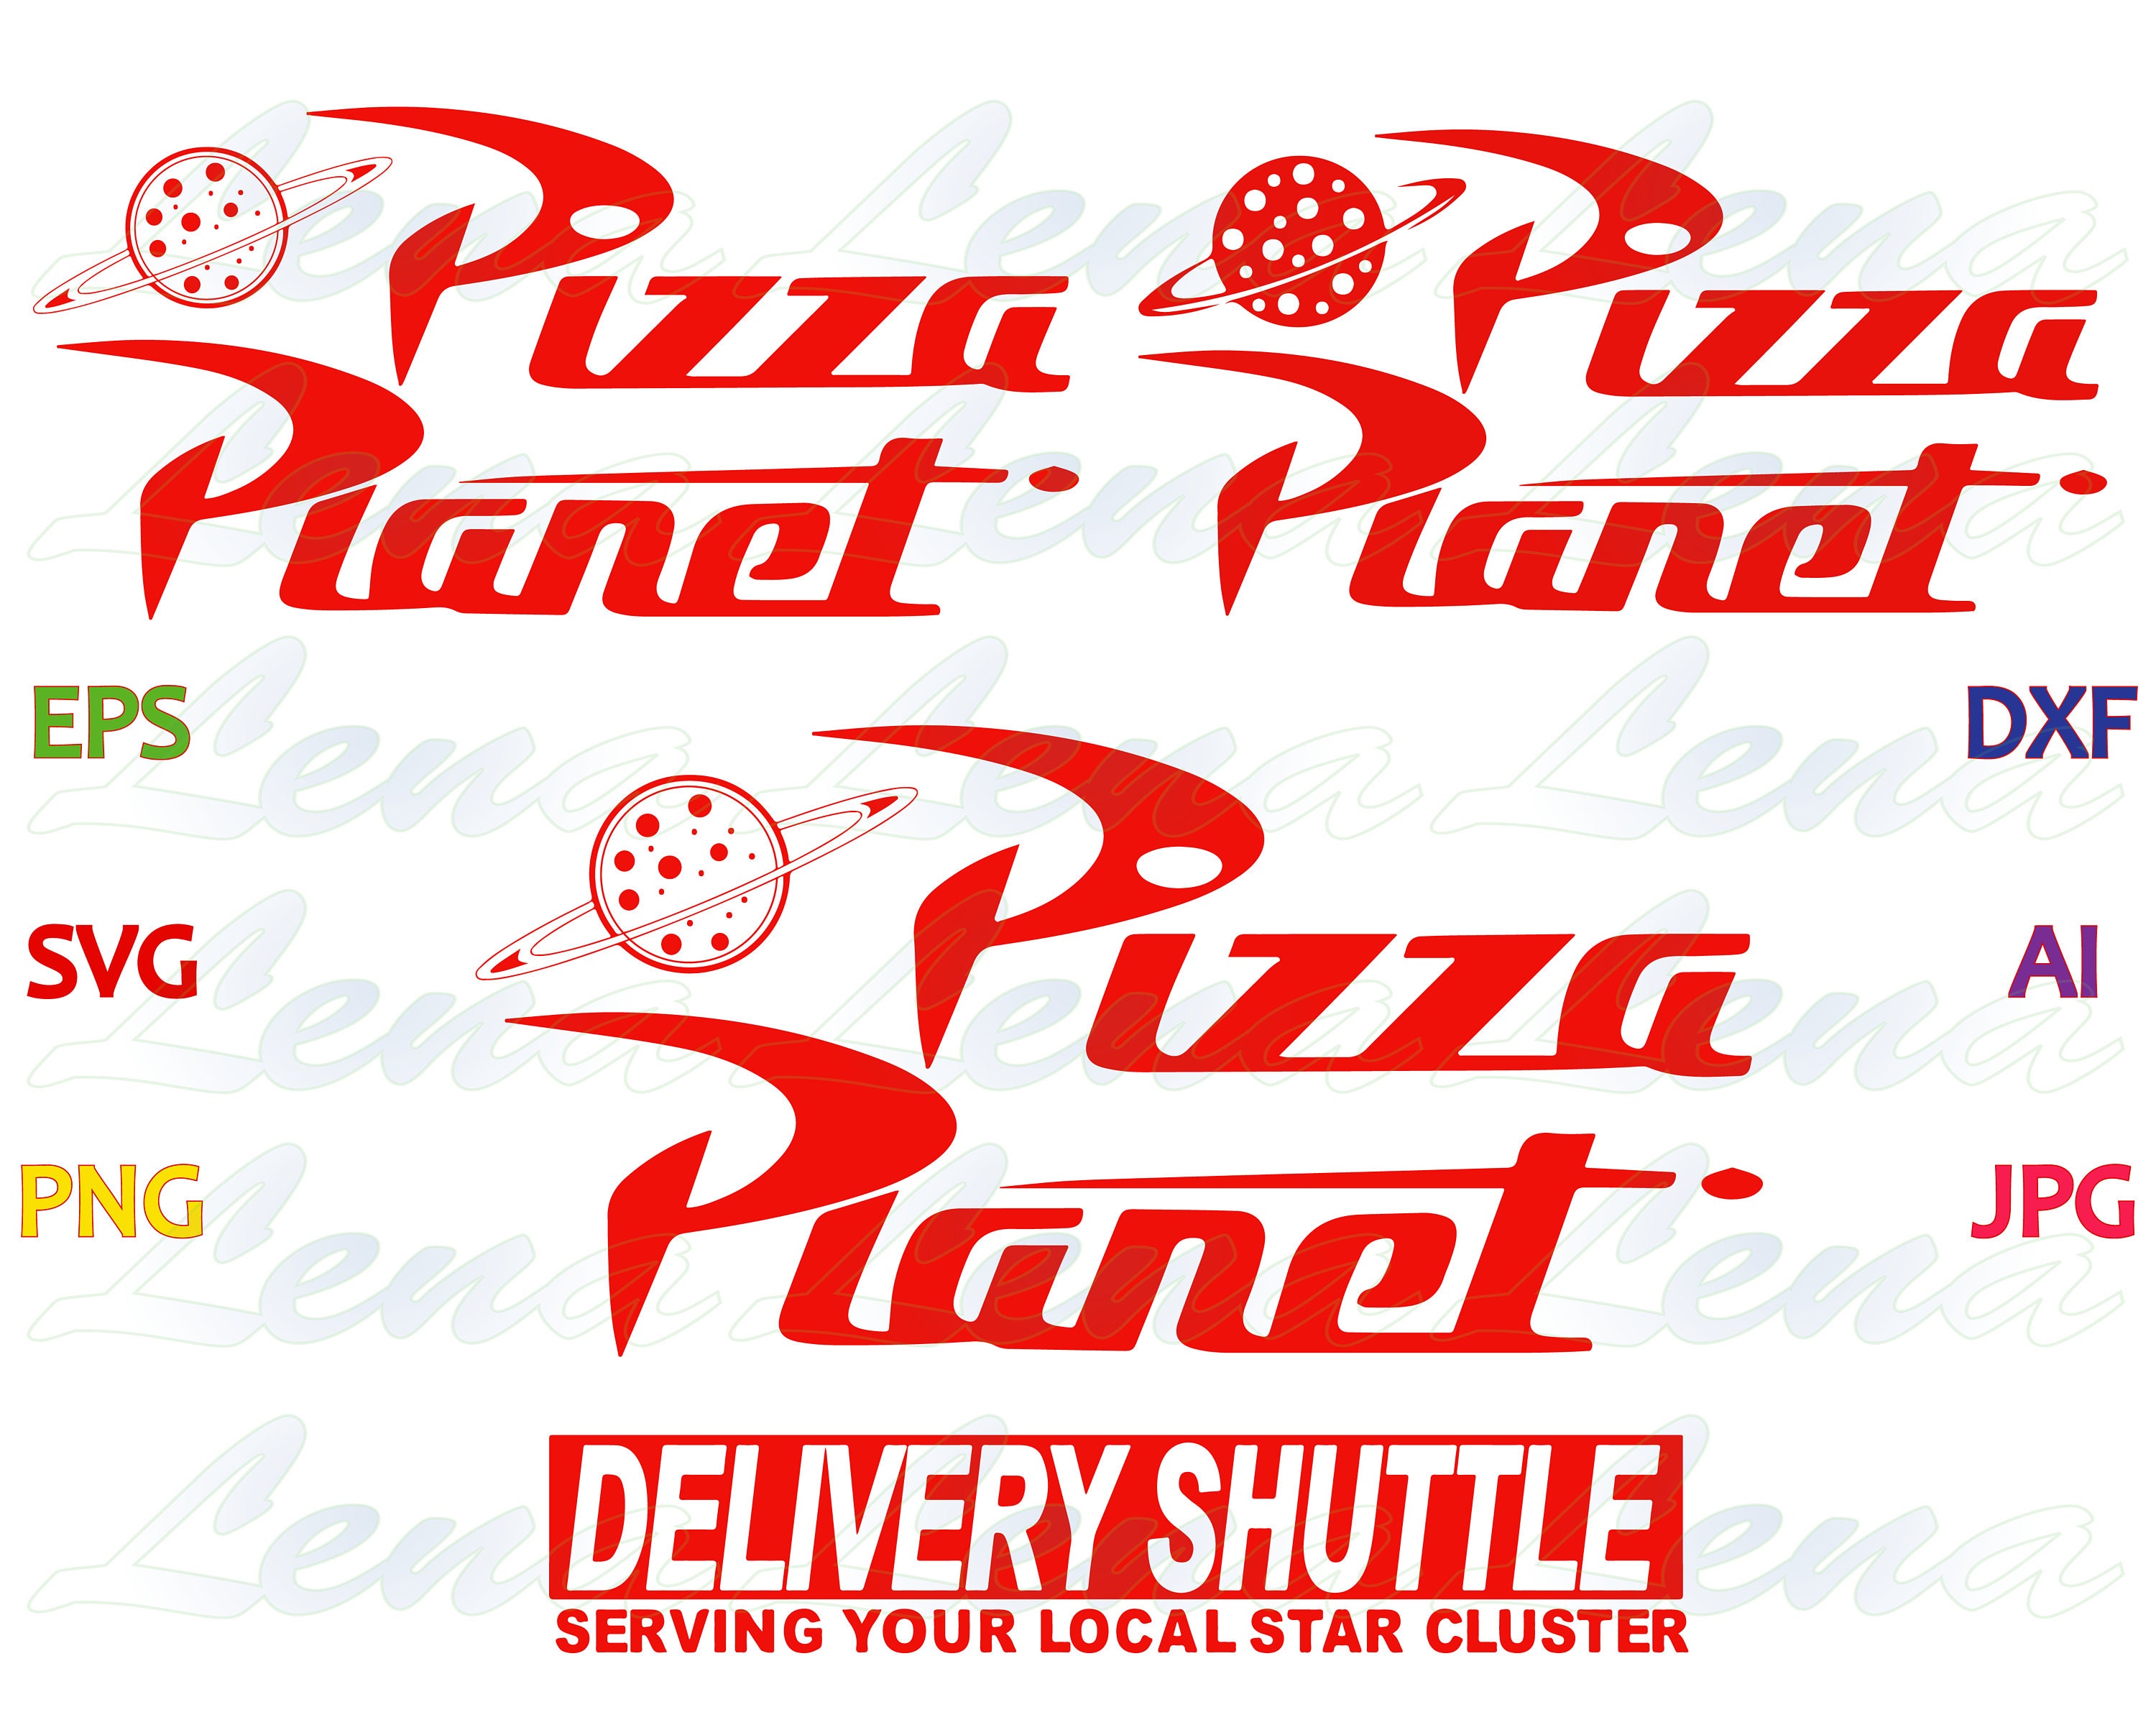 Download Toy Story pizza planet SVG Toy Story logo Pizza Planet ...